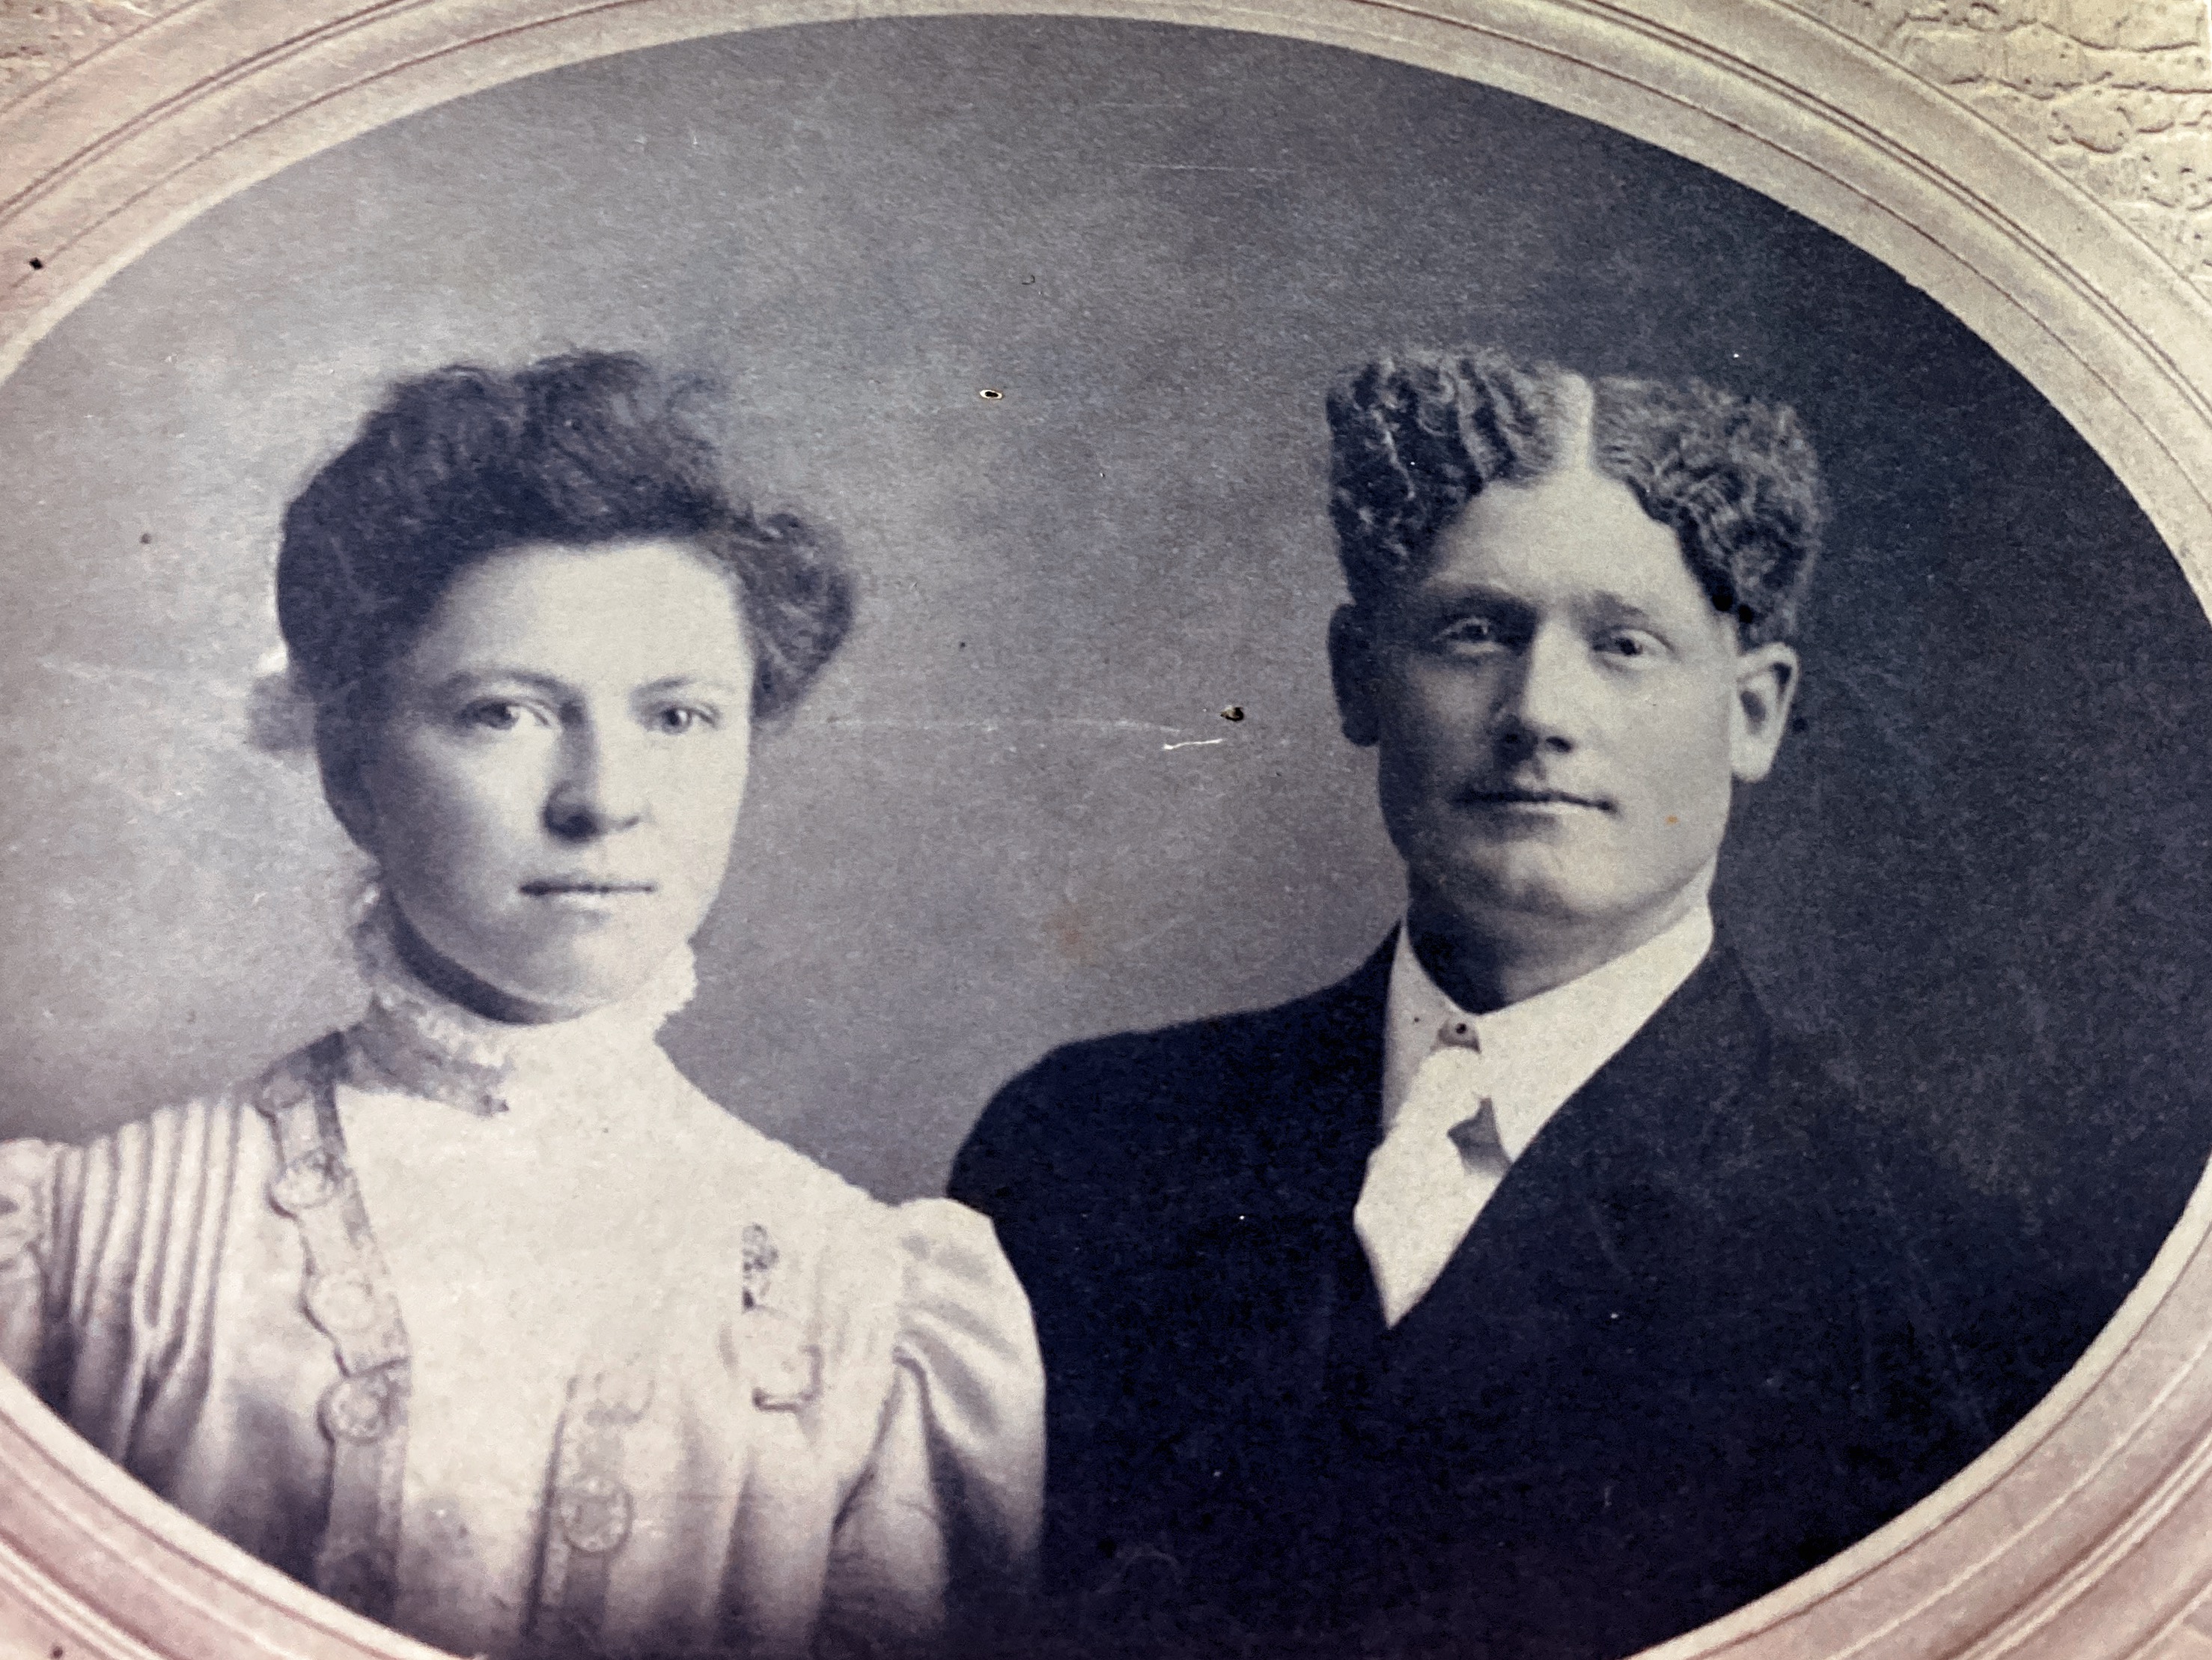 Laurel Luttrell Woodmansee, John Orville Woodmansee wedding photograph early 1900s to 19 05,1- 1906